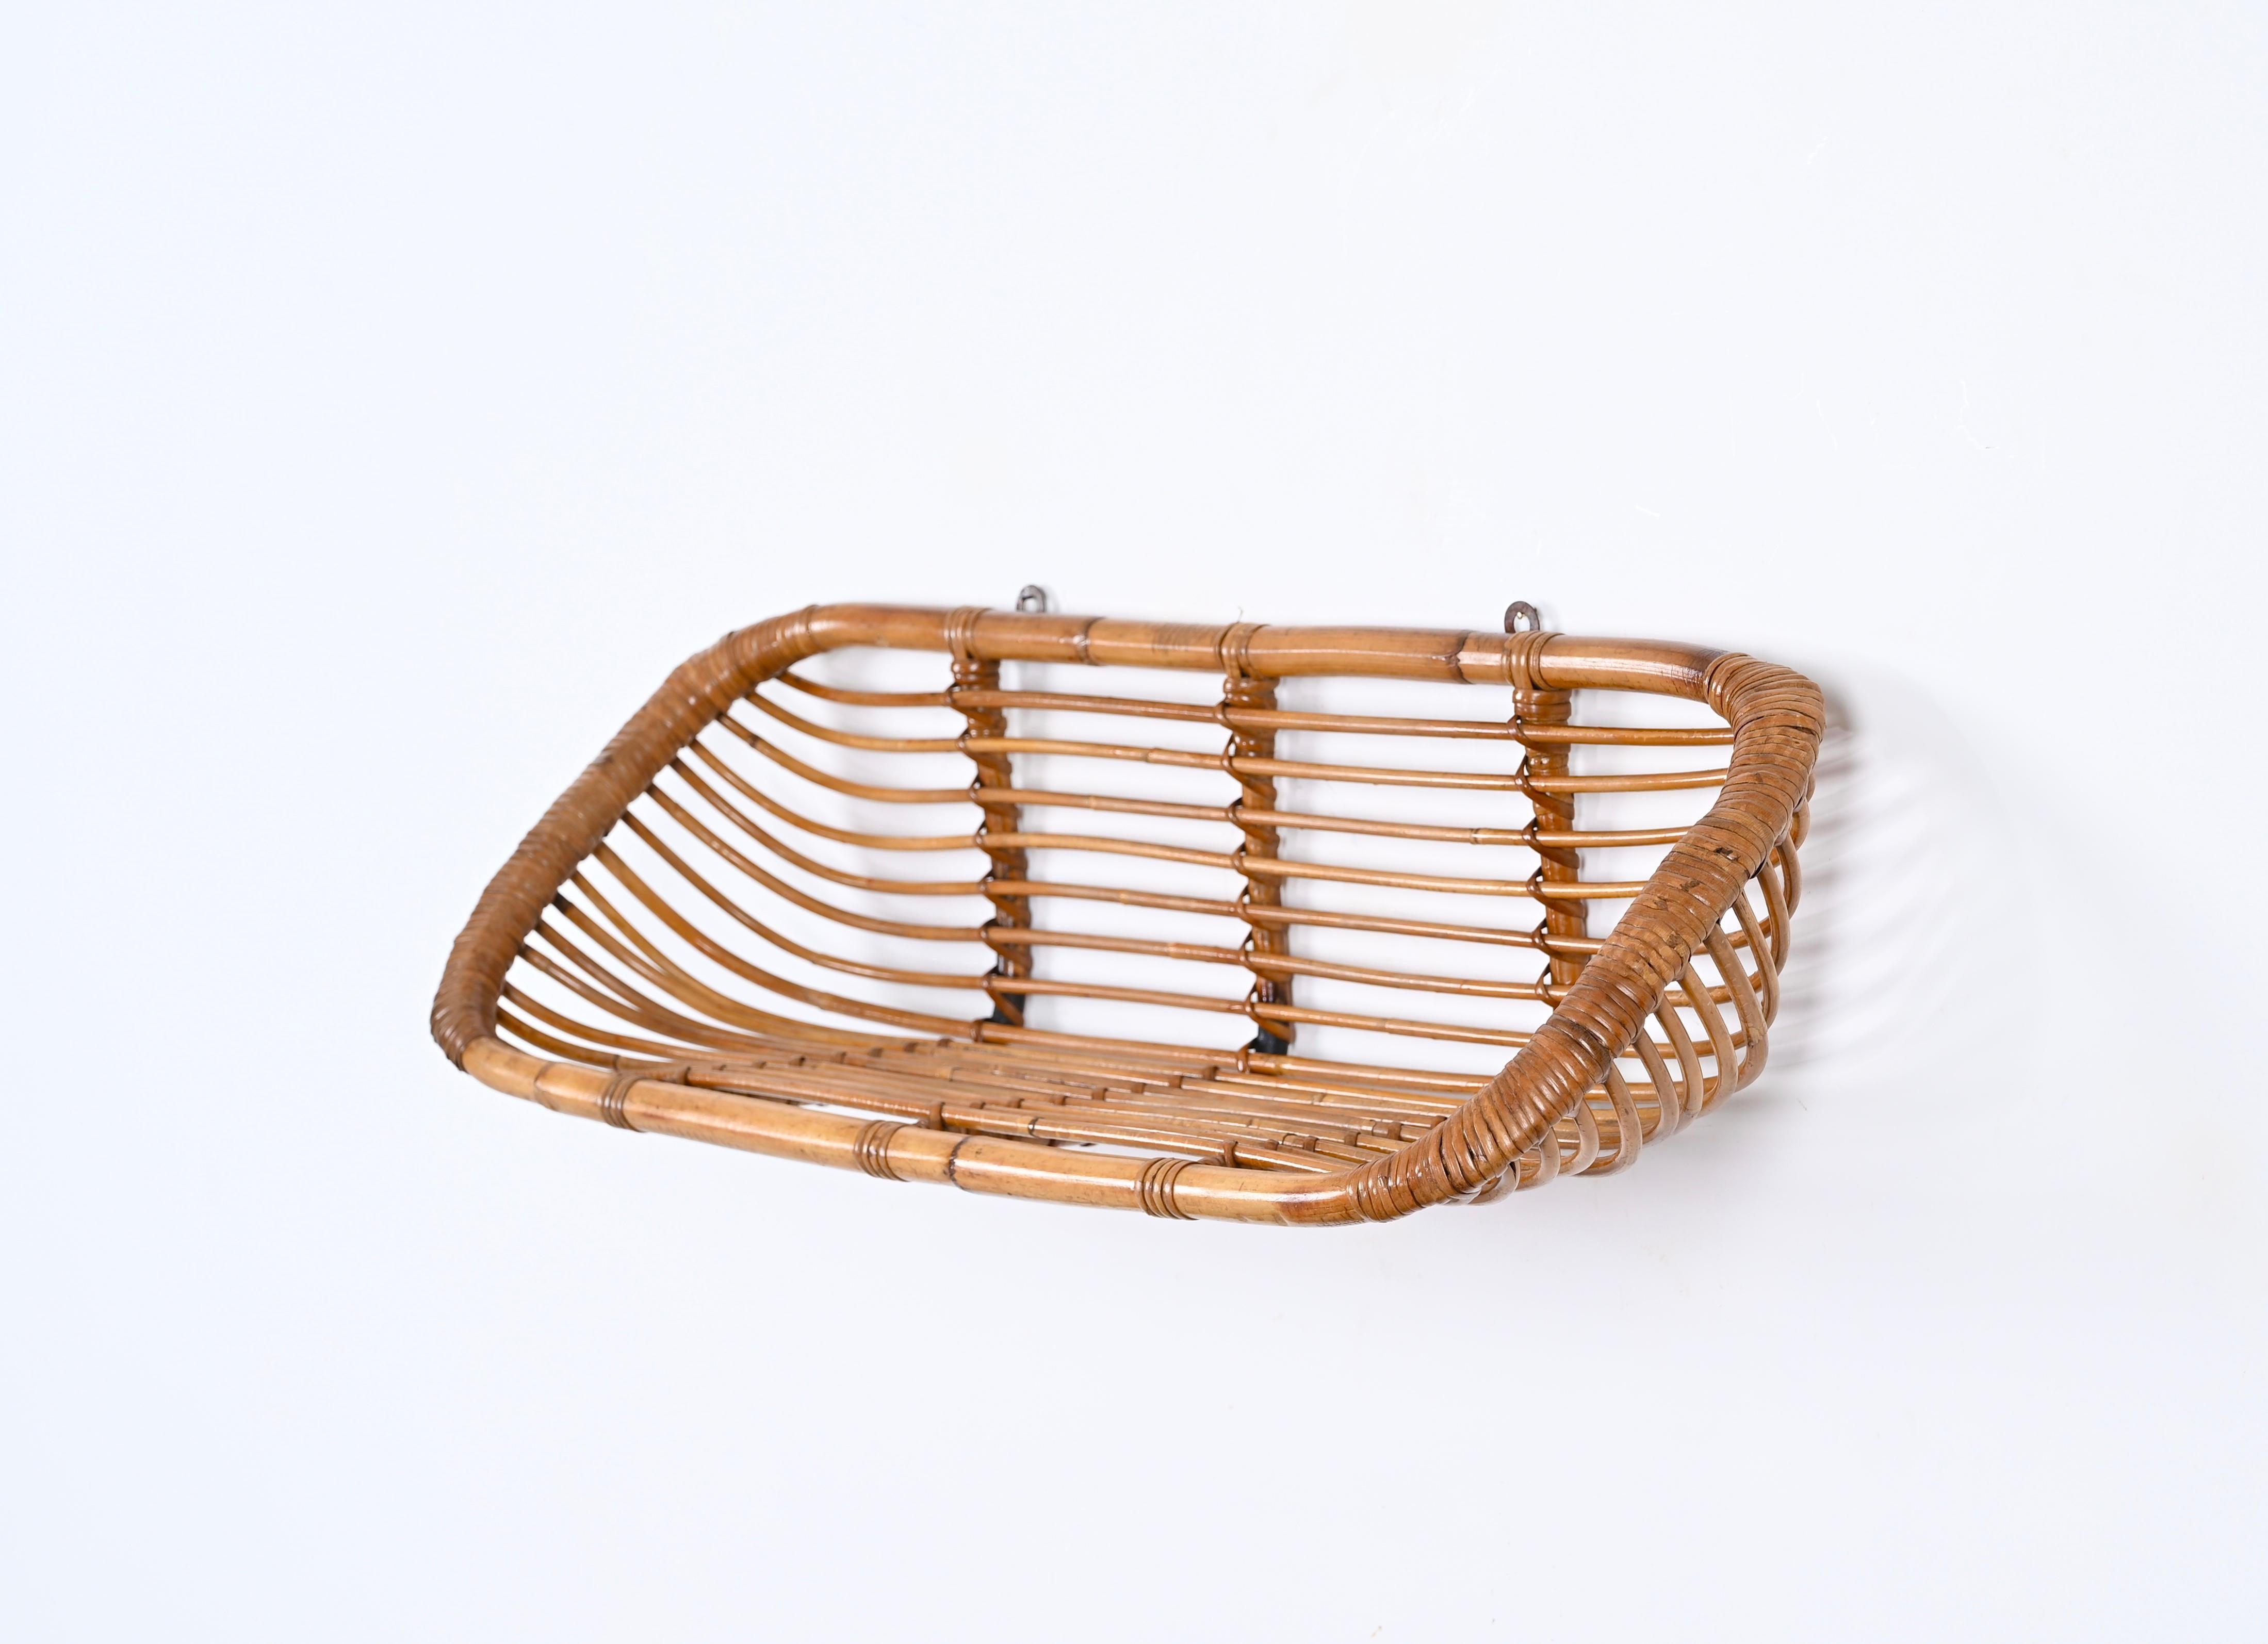  Franco Albini Mid-Century Wall Shelf in Rattan and Bamboo, Italy, 1960s For Sale 5